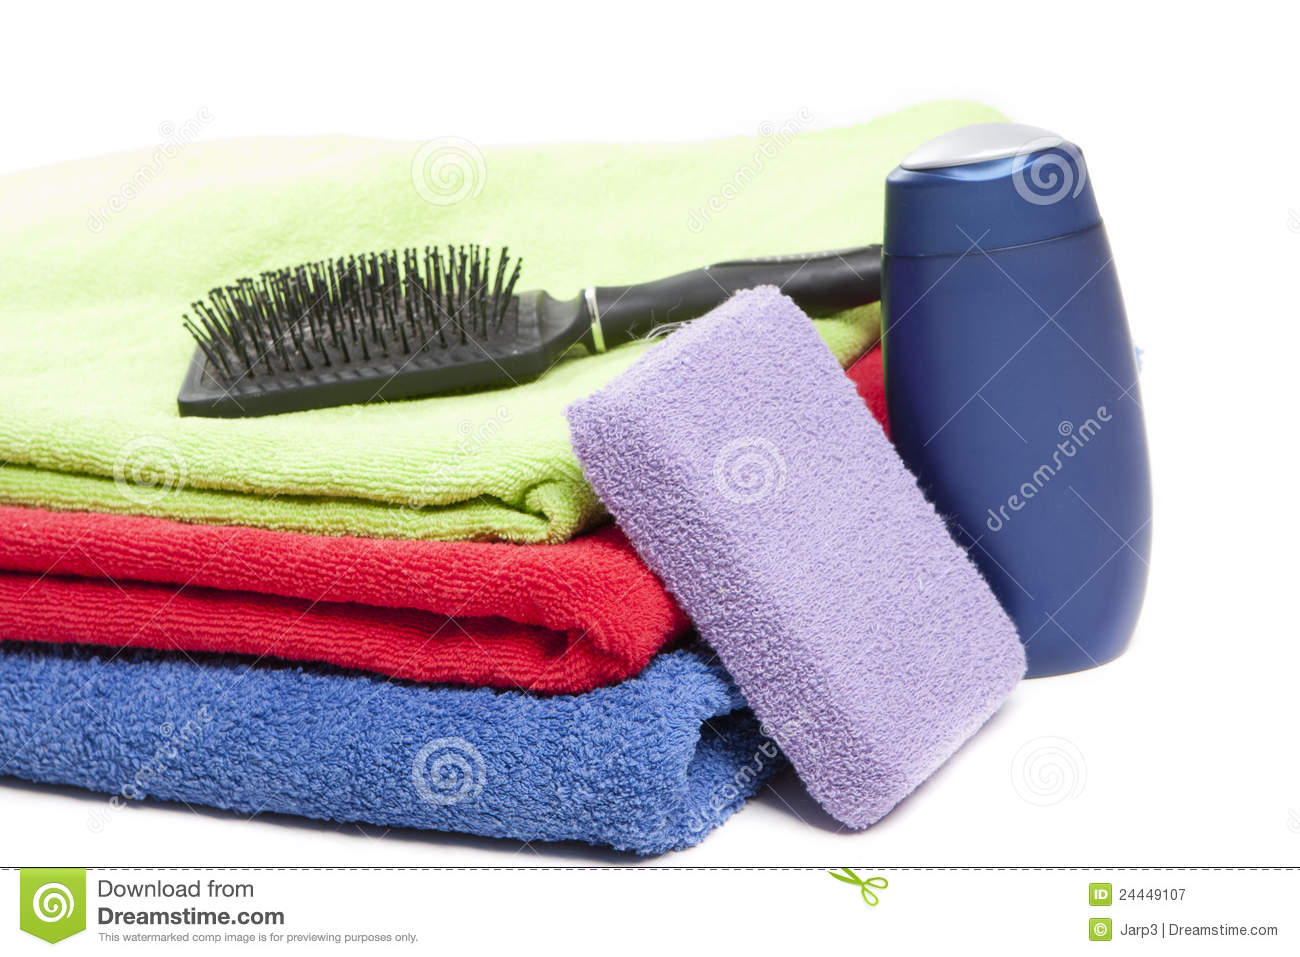 Personal Hygiene Items Royalty Free Stock Photography   Image    